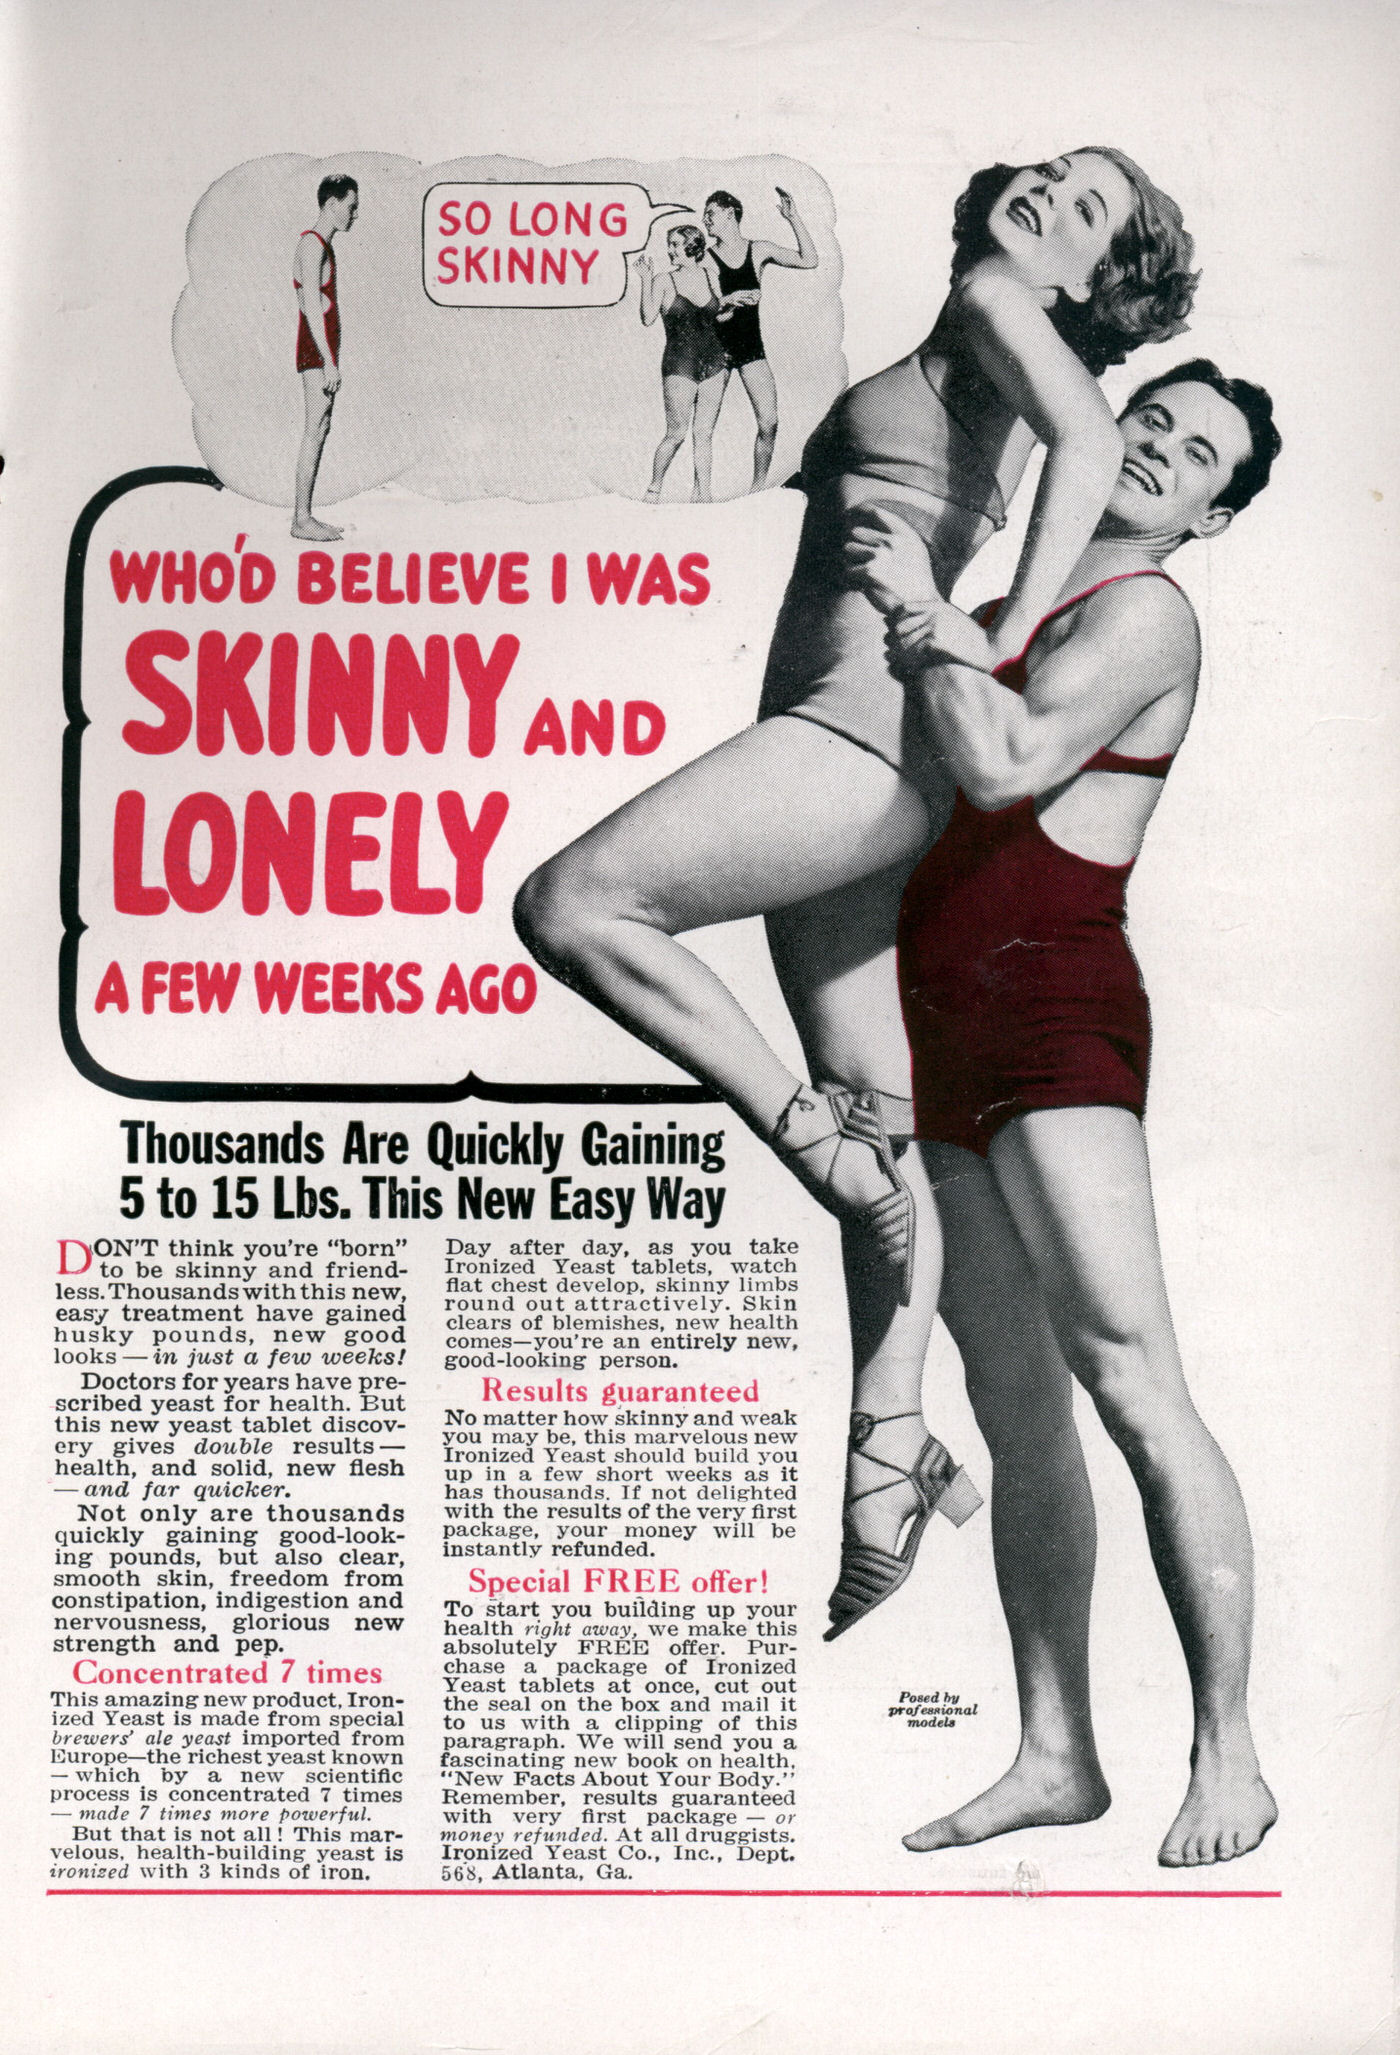 No Skinny Man has an Ounce of Sex Appeal: A Look into 1930s Ads Urging Men to Gain Weight